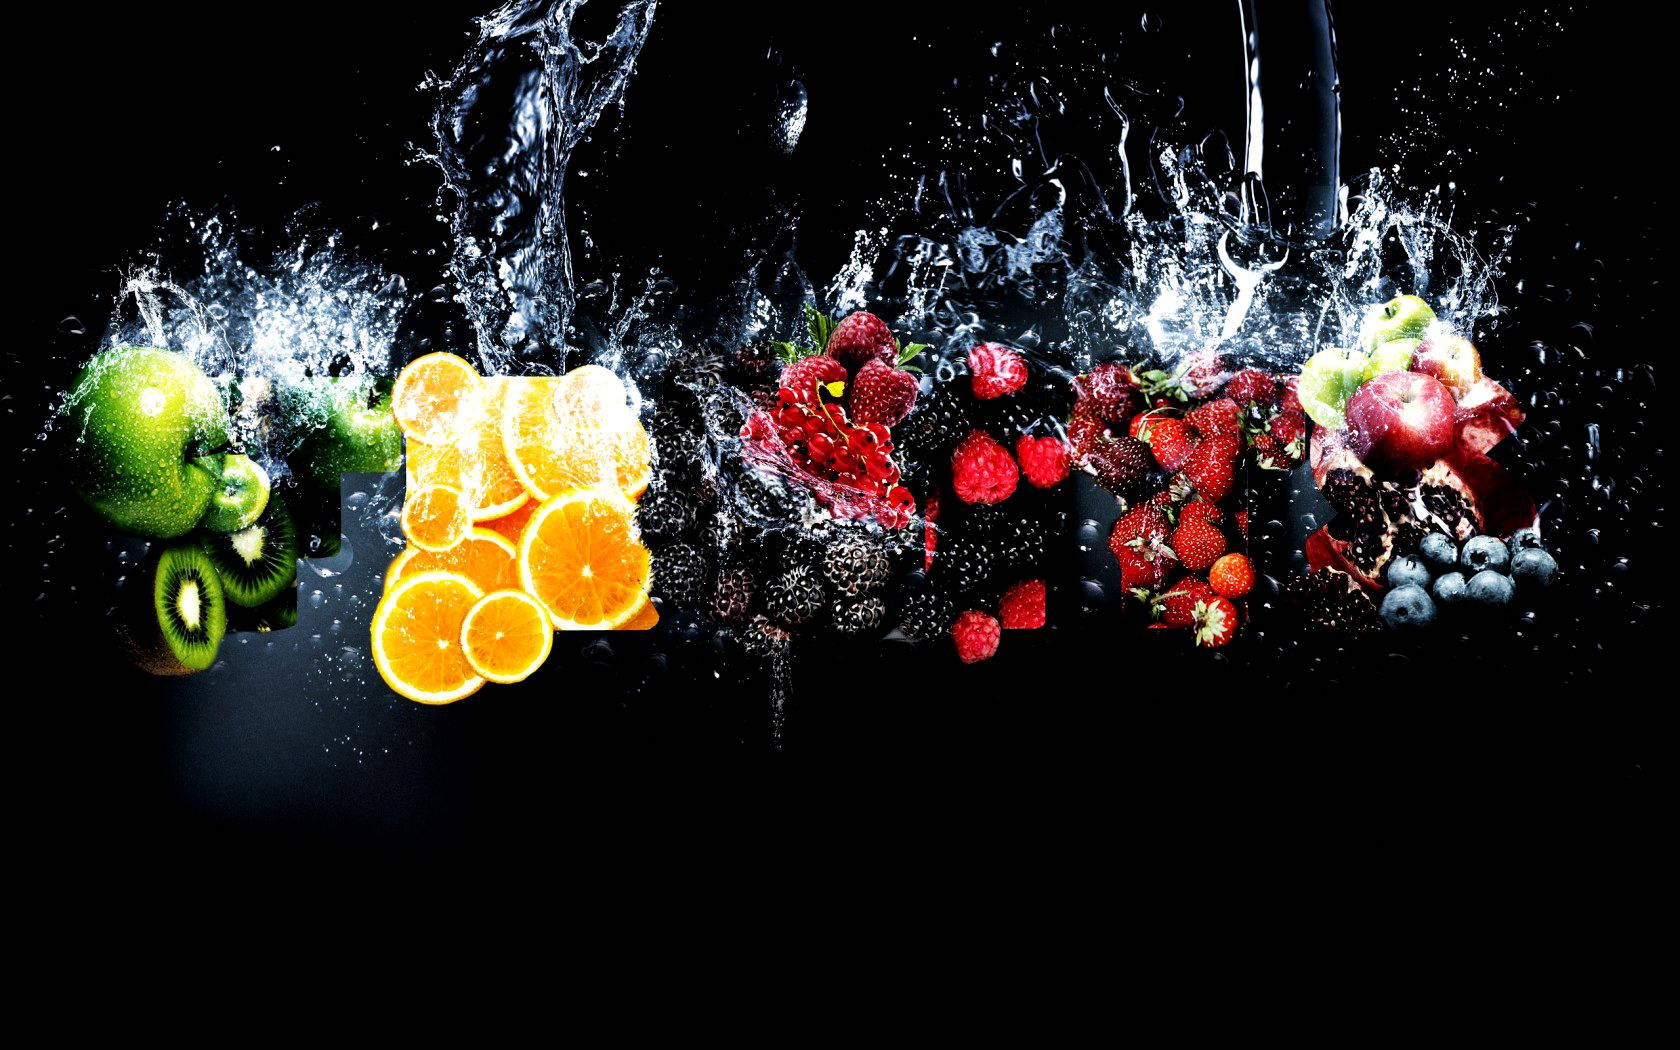 Invigorate Your Health - A collection of various fresh fruits Wallpaper